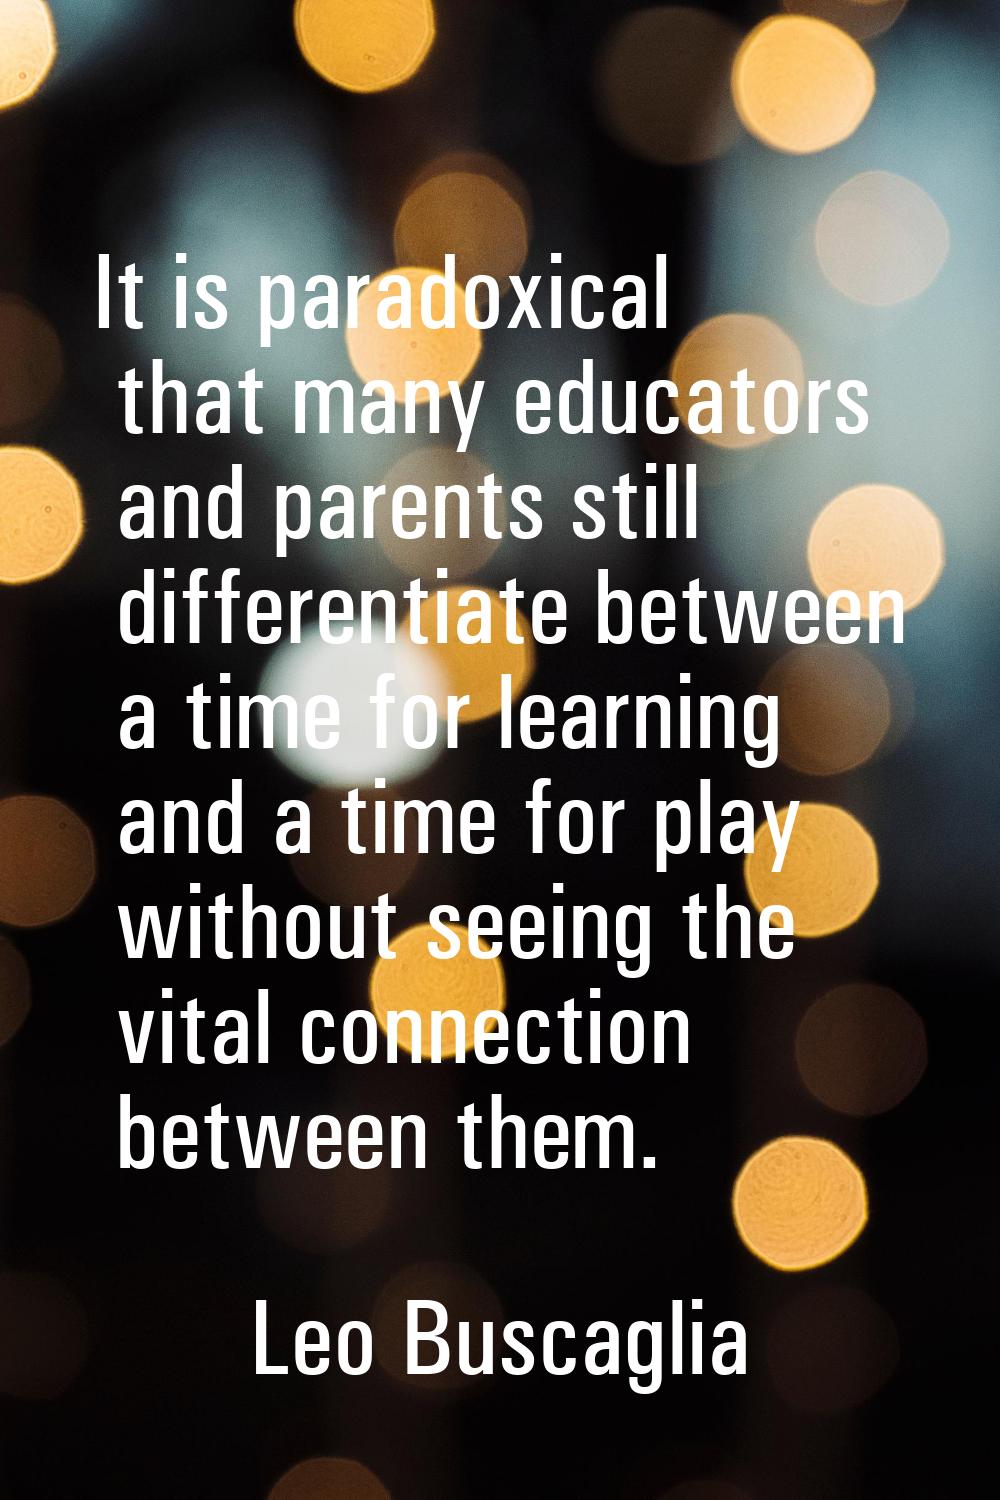 It is paradoxical that many educators and parents still differentiate between a time for learning a